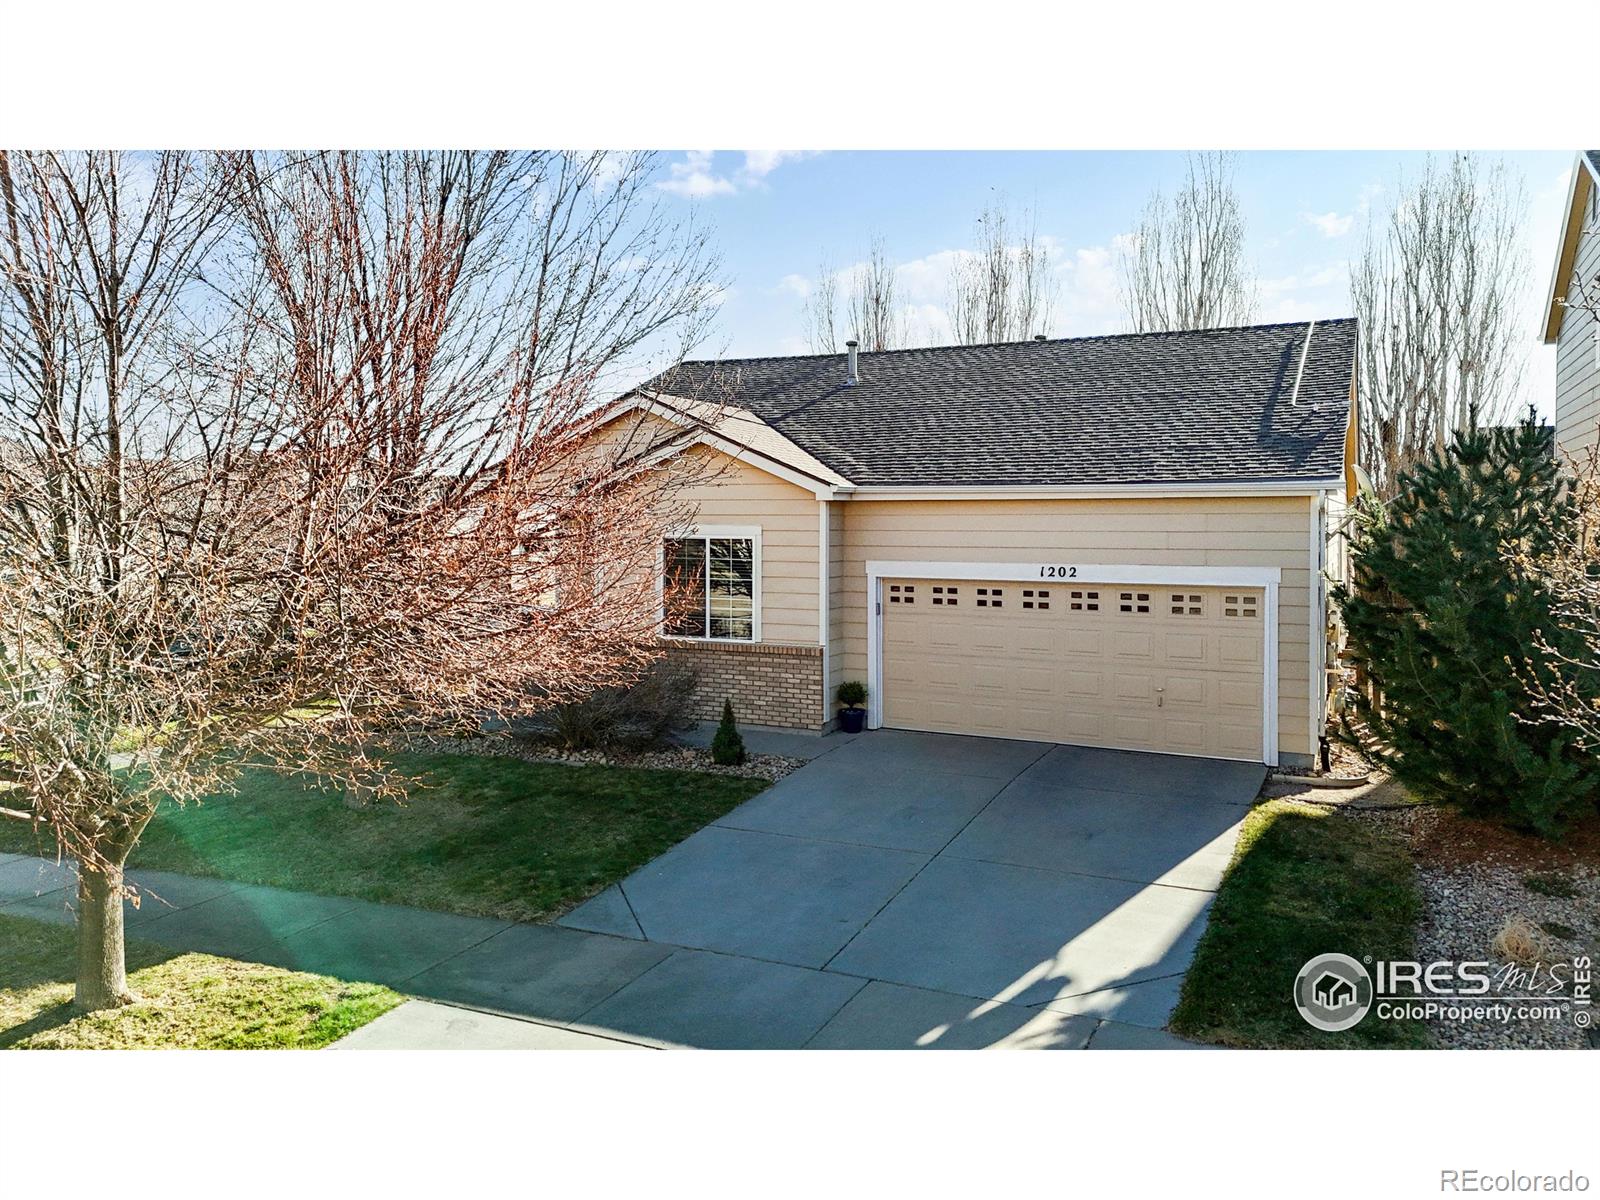 1202  103rd Avenue, greeley MLS: 4567891006656 Beds: 3 Baths: 2 Price: $433,000